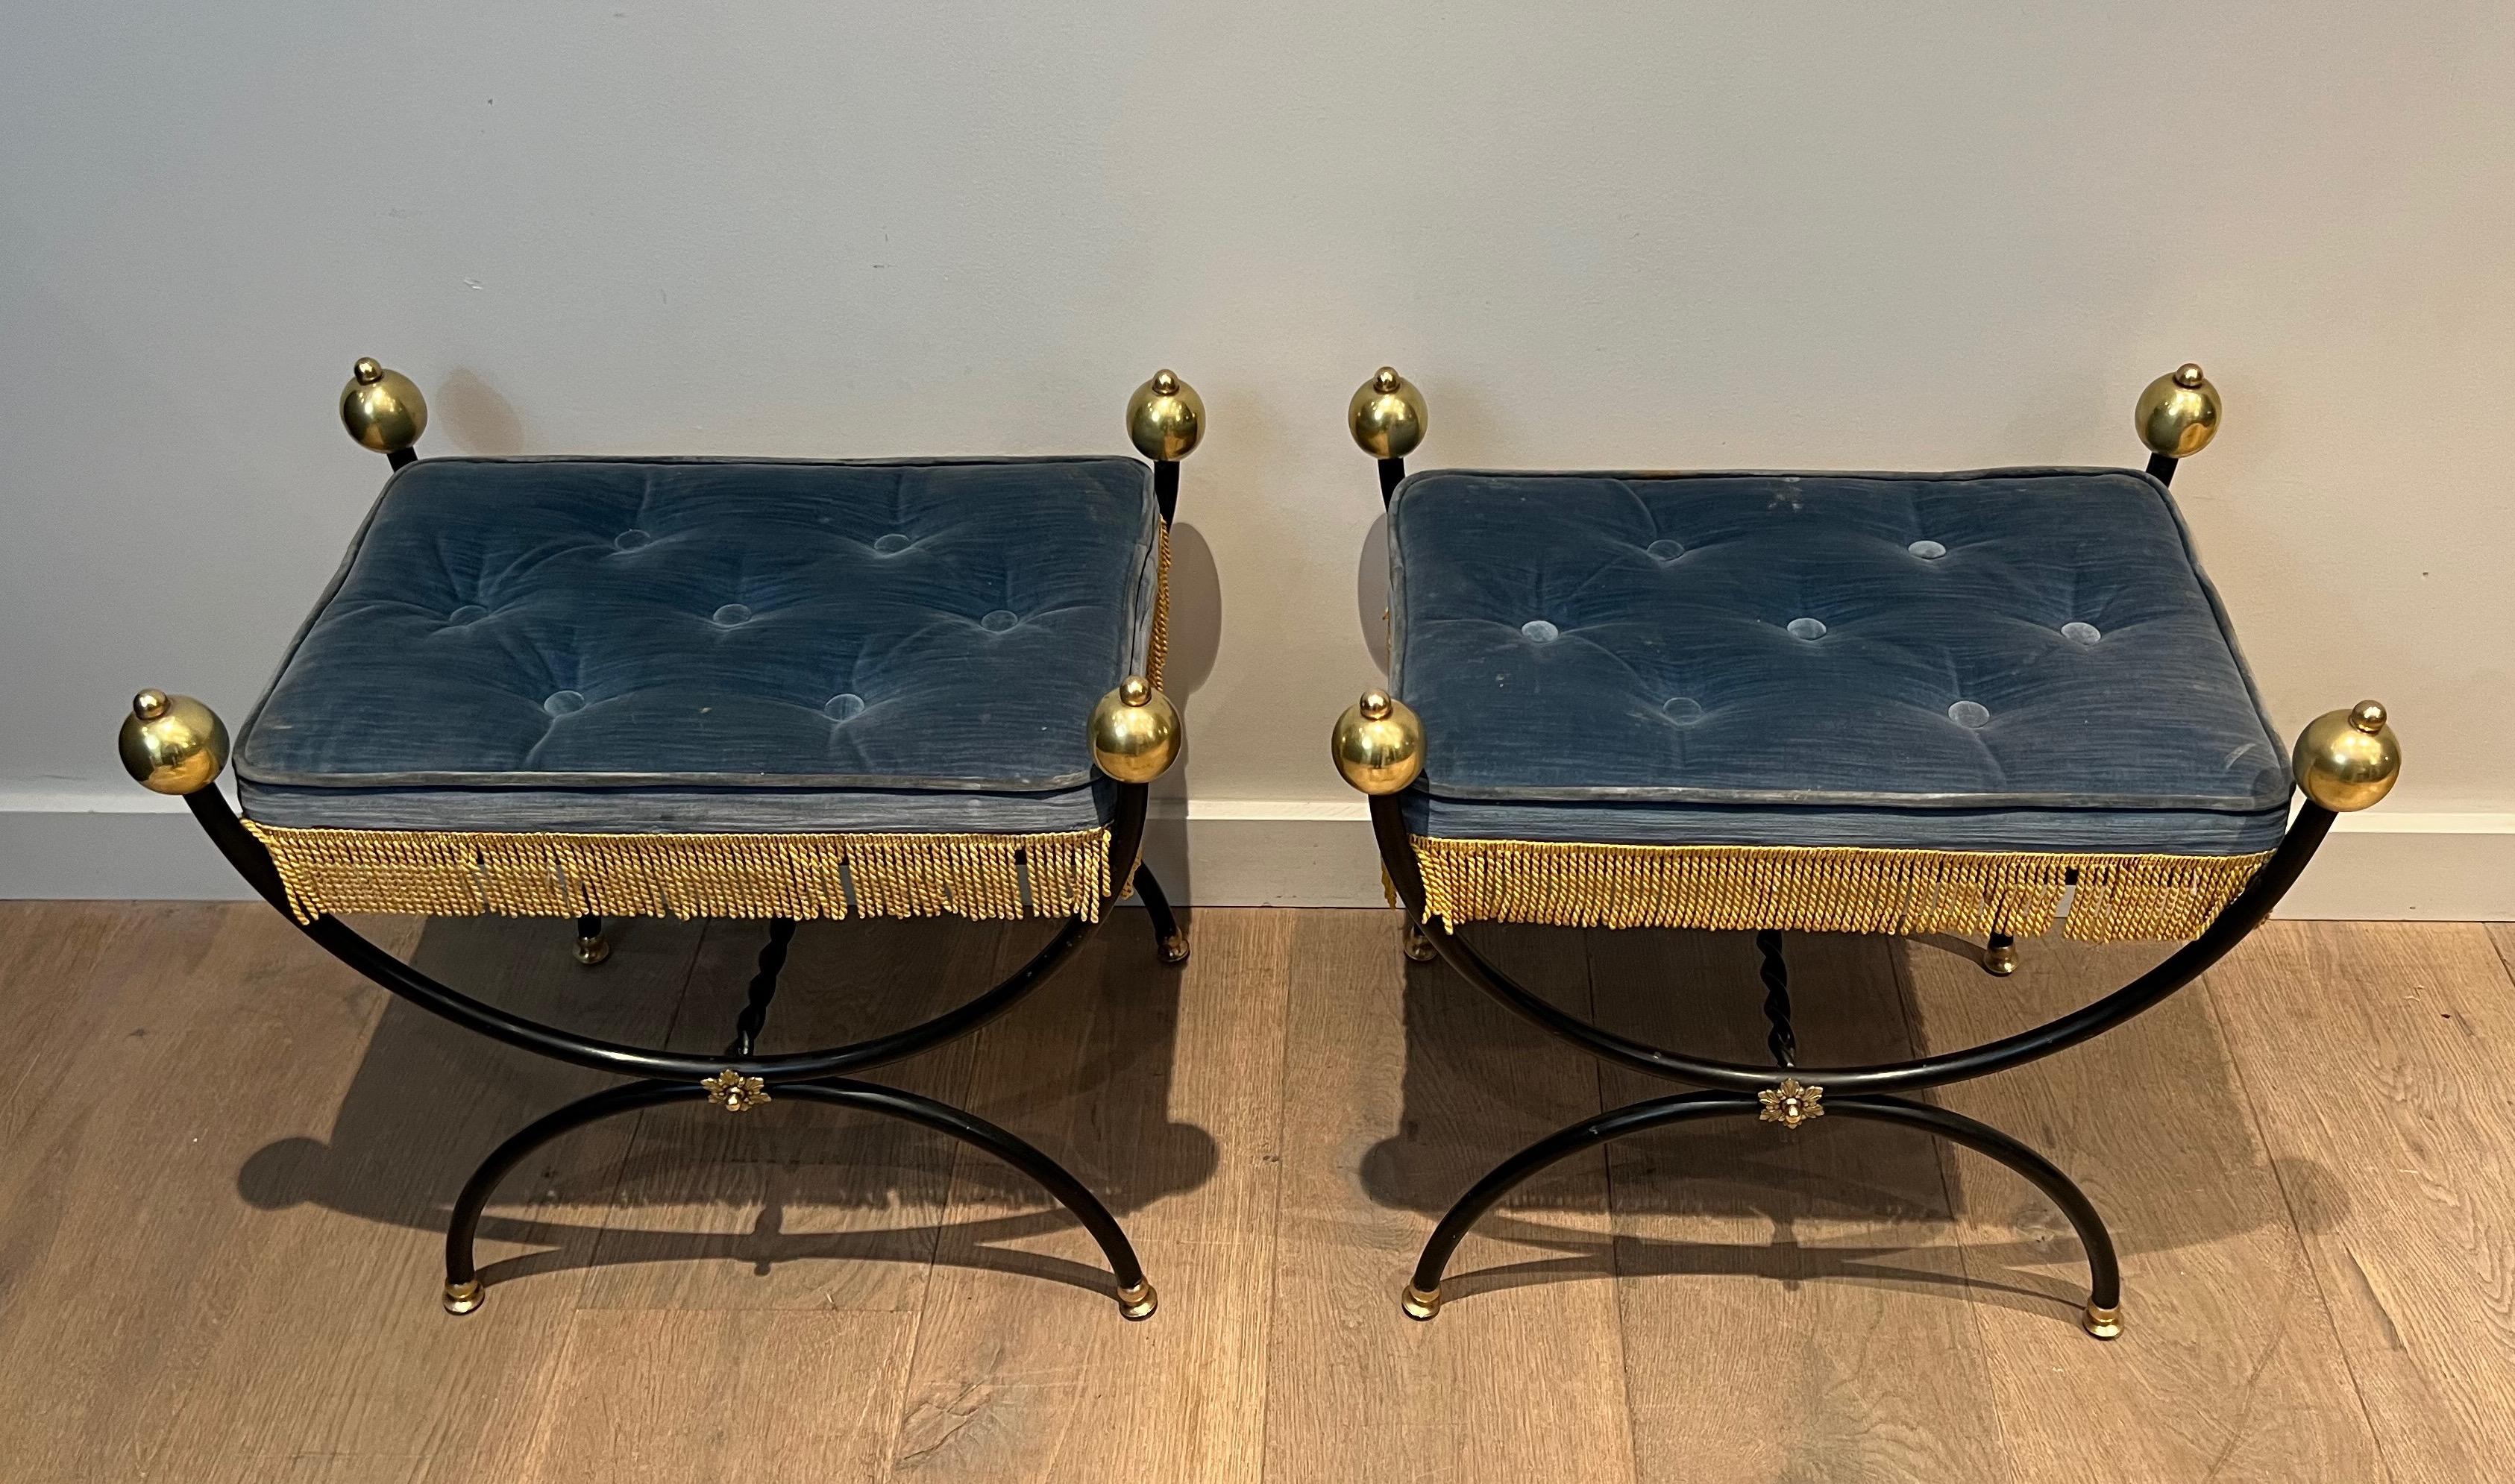 This very elegant pair of neoclassical style curule stools is made of a black lacquered metal base topped with large brass balls. The seats are covered with a Royal blue velvet and golden fringes. This is a French work. Circa 1950